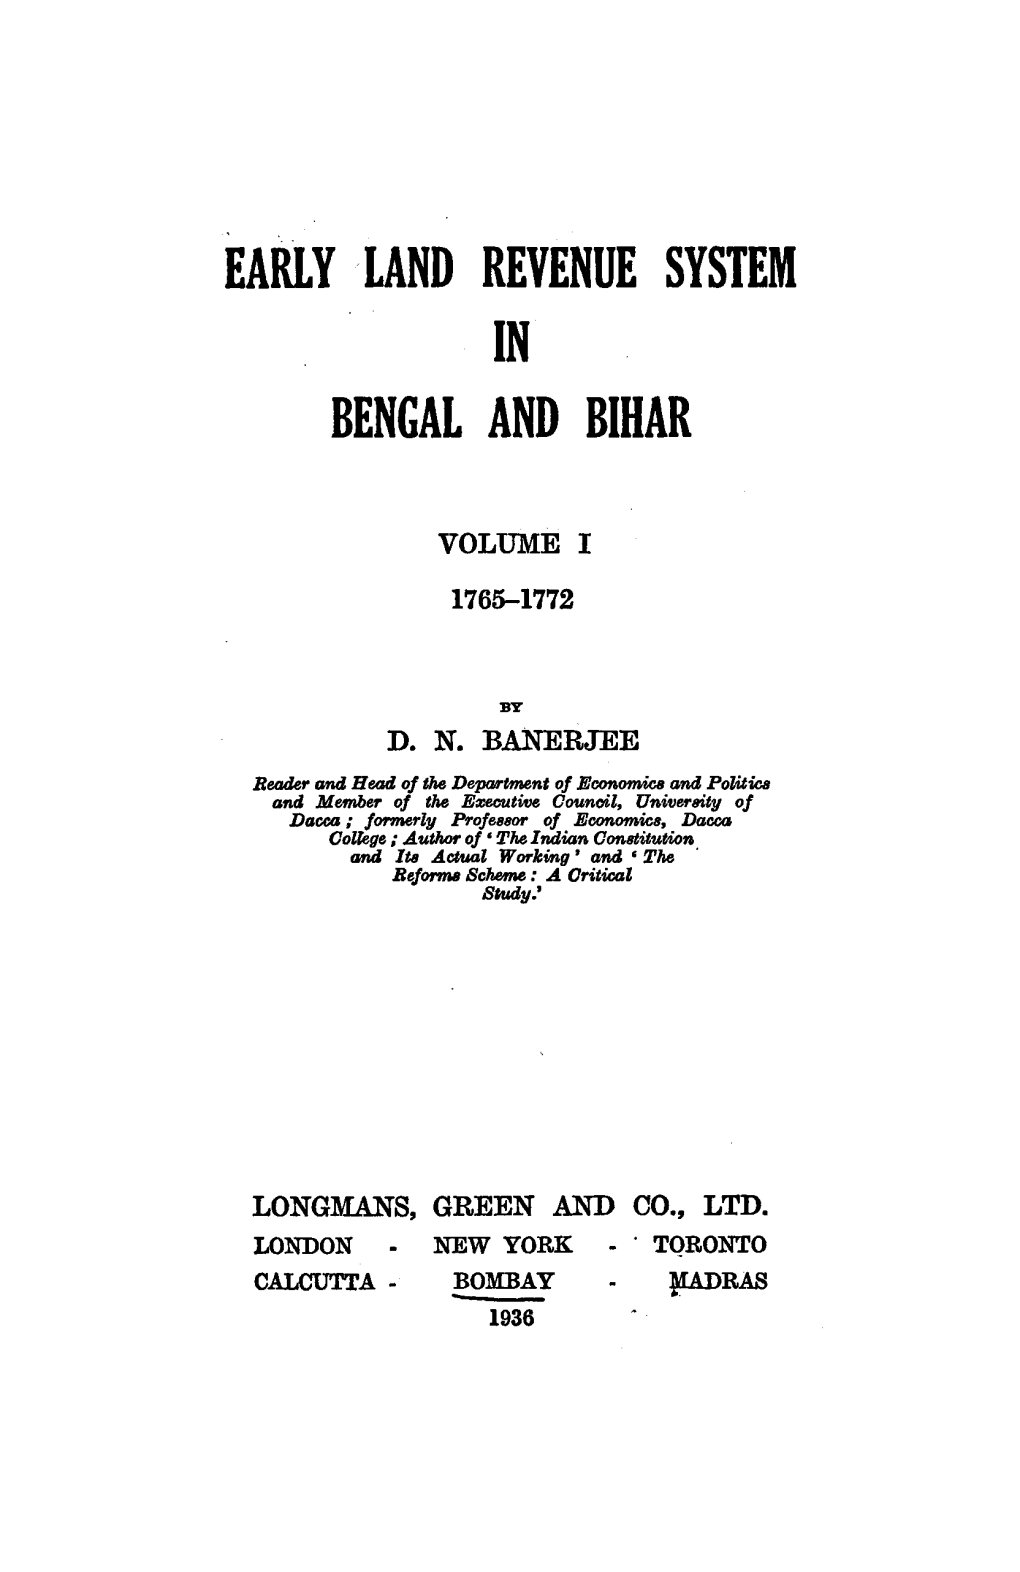 Early Land Revenue System in Bengal and Bihar